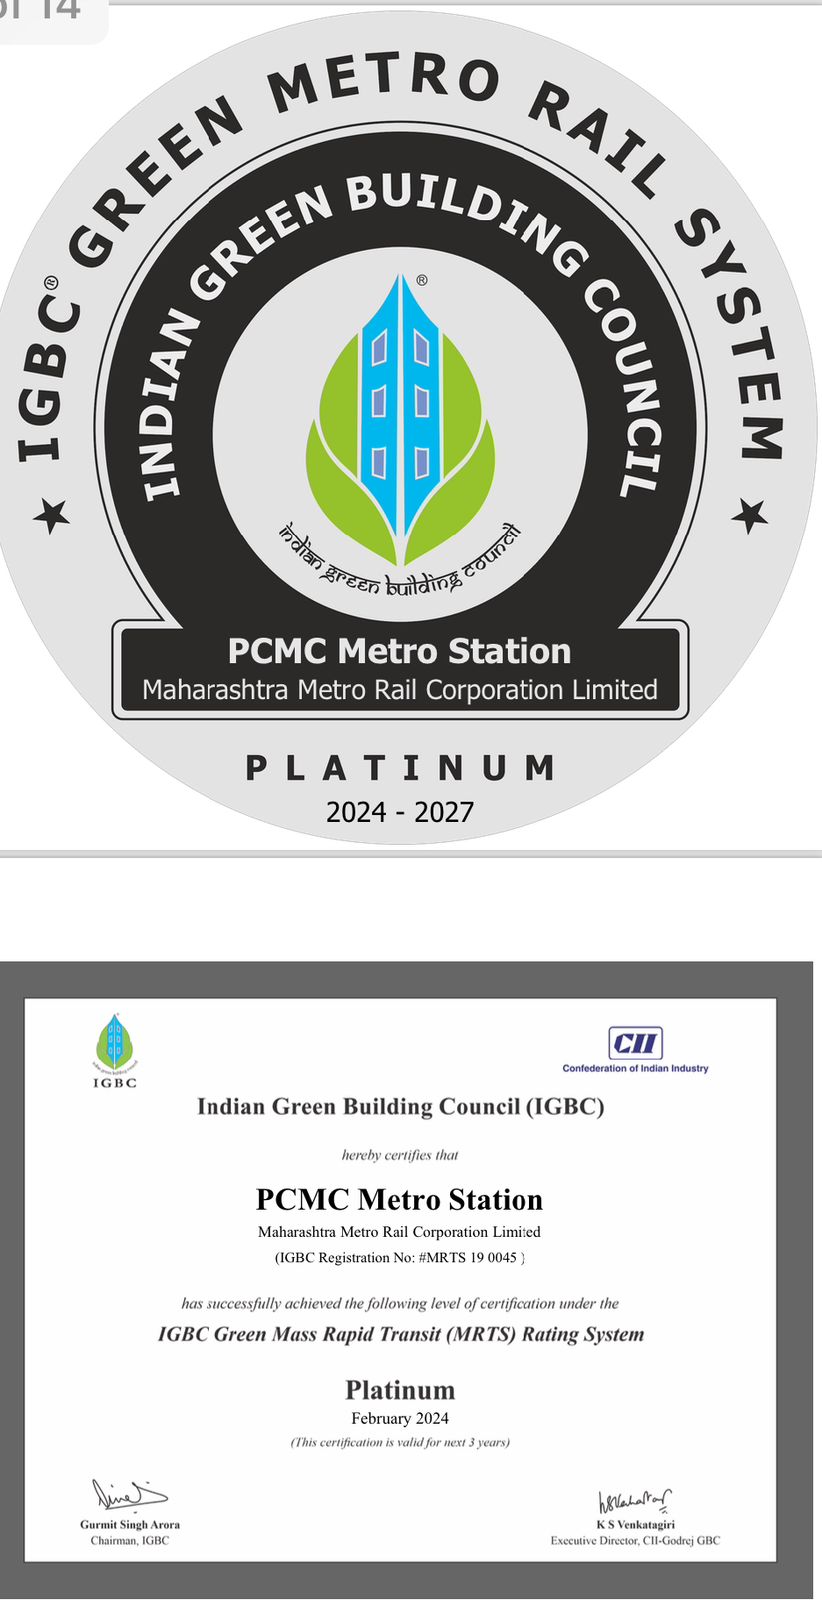 7 Stations of Pune Metro Gets the IGBC Platinum Rating under MRTS Elevated Stations Category